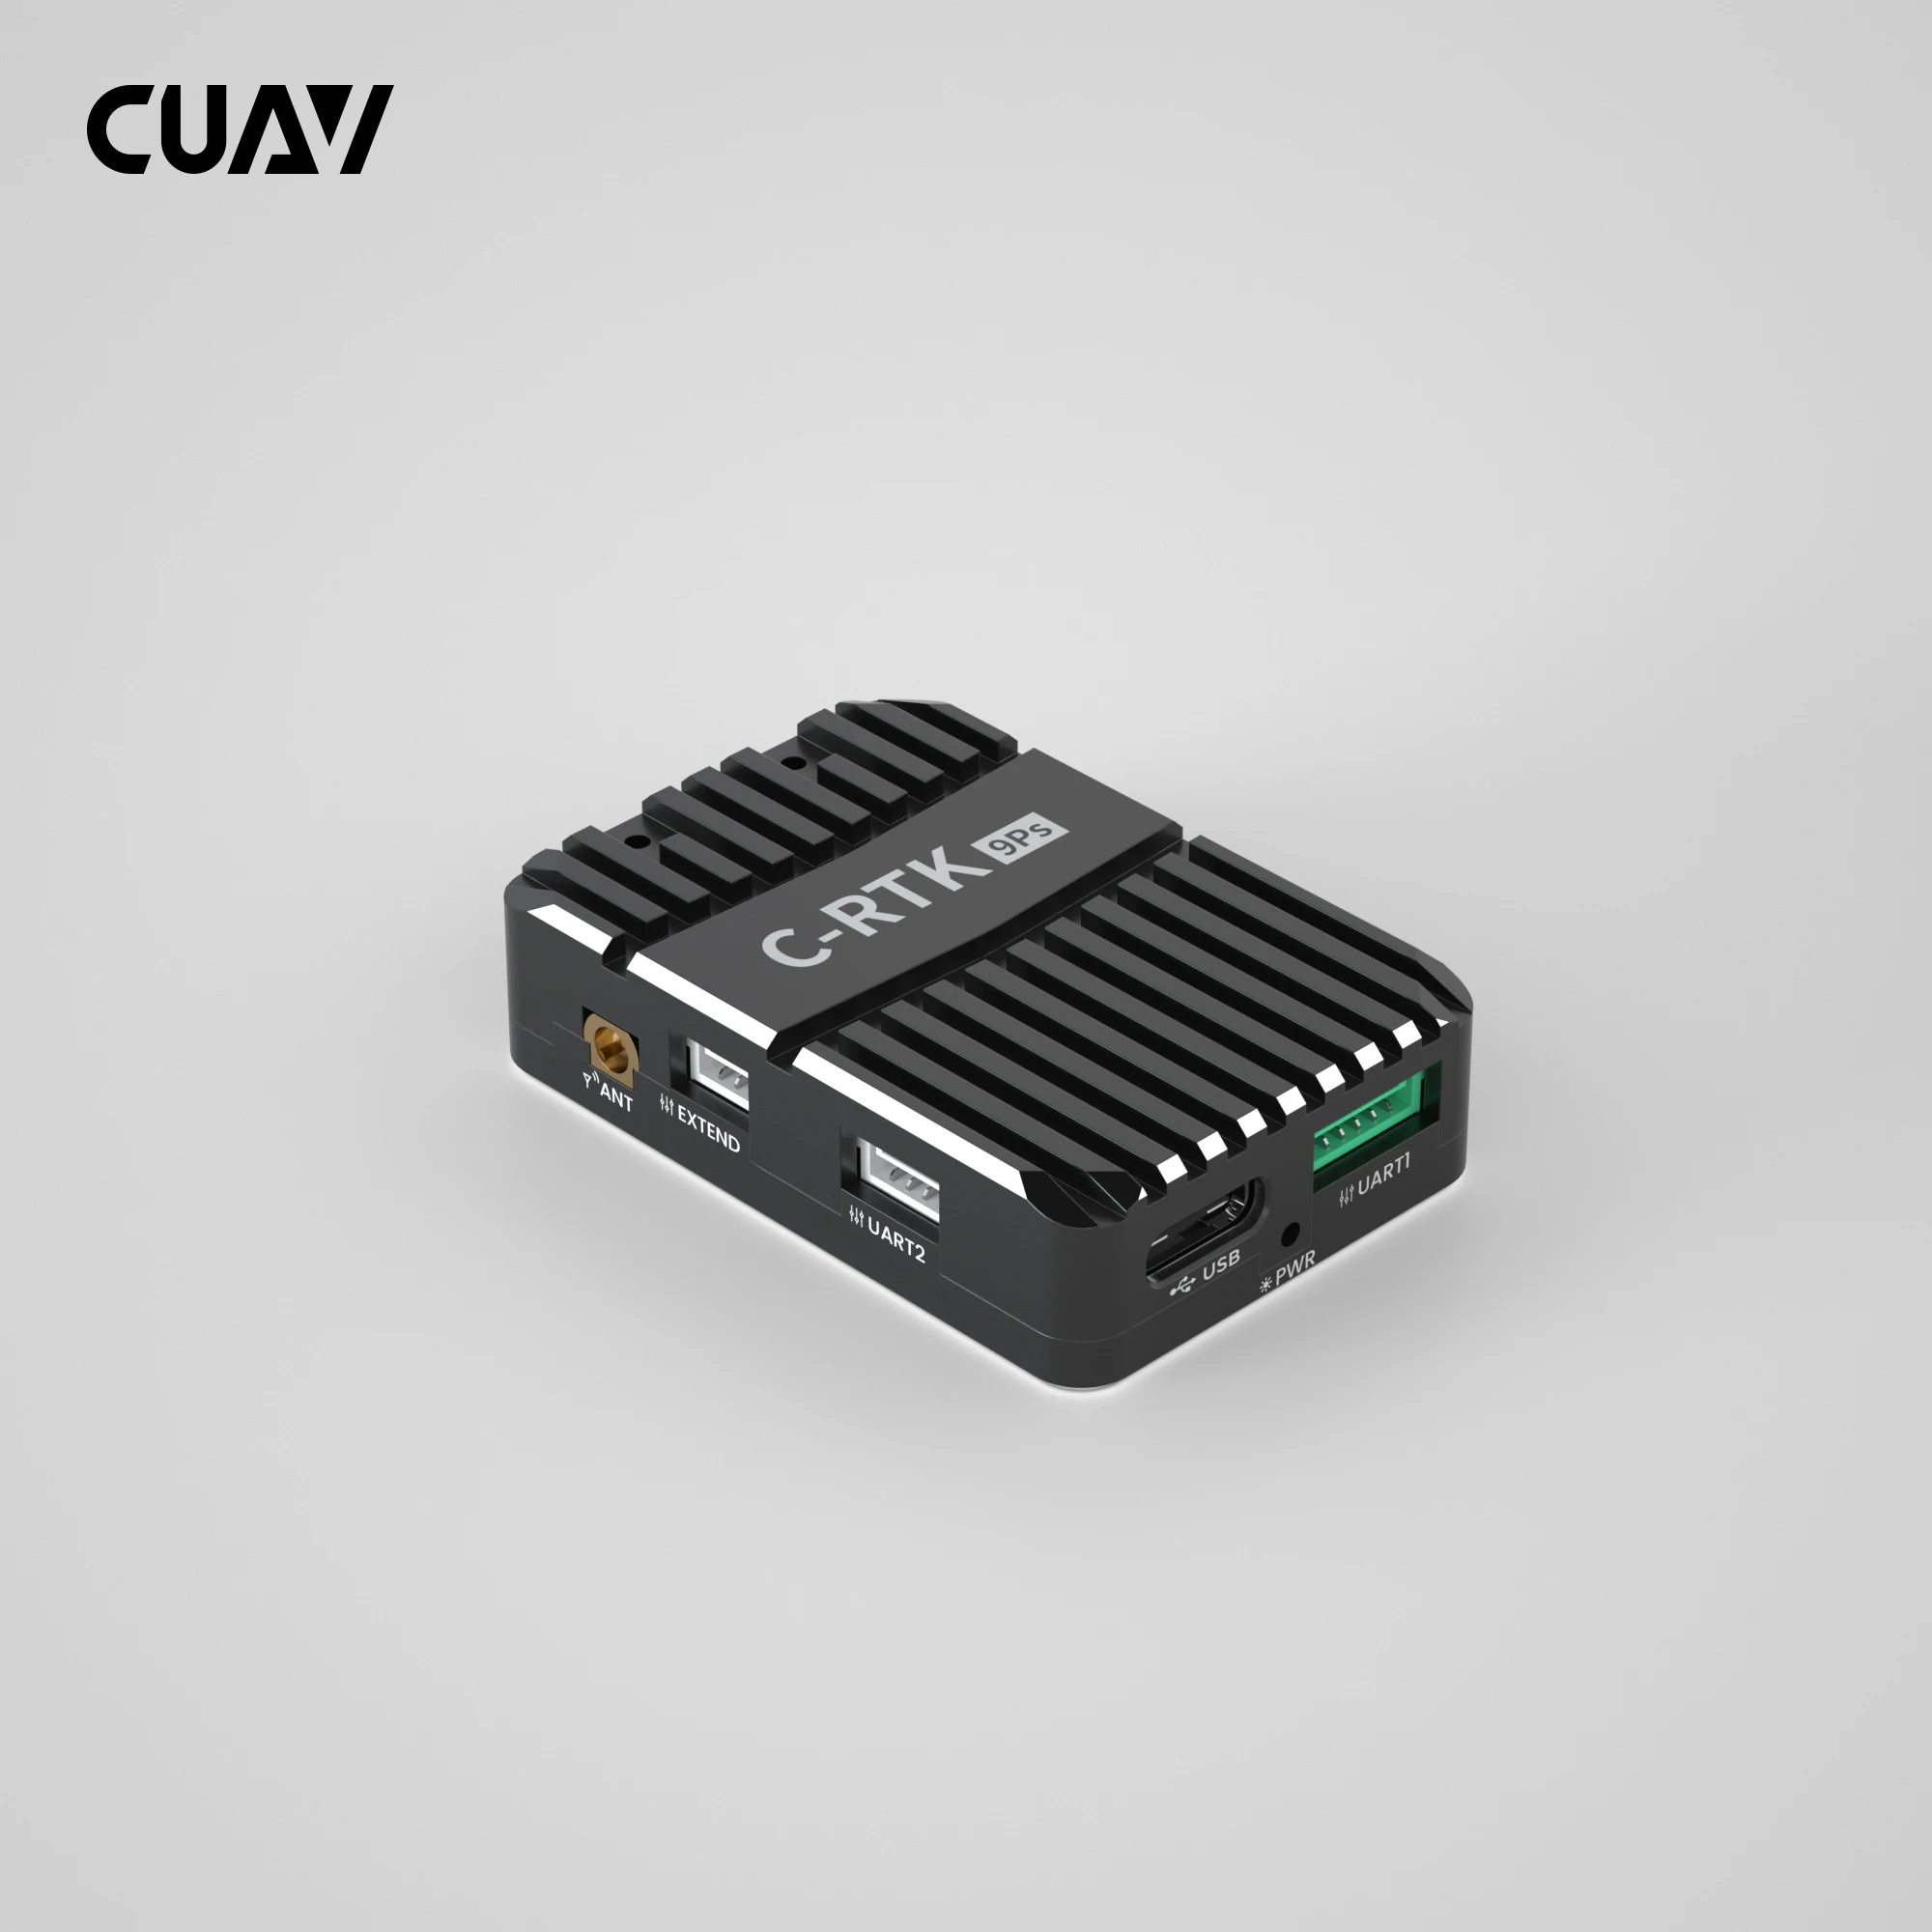 

CUAV Dual RTK 9Ps For Yaw GPS Centimeter-level High Percision Precise Positioning Multi-Star Multi-Frequency GNSS Module